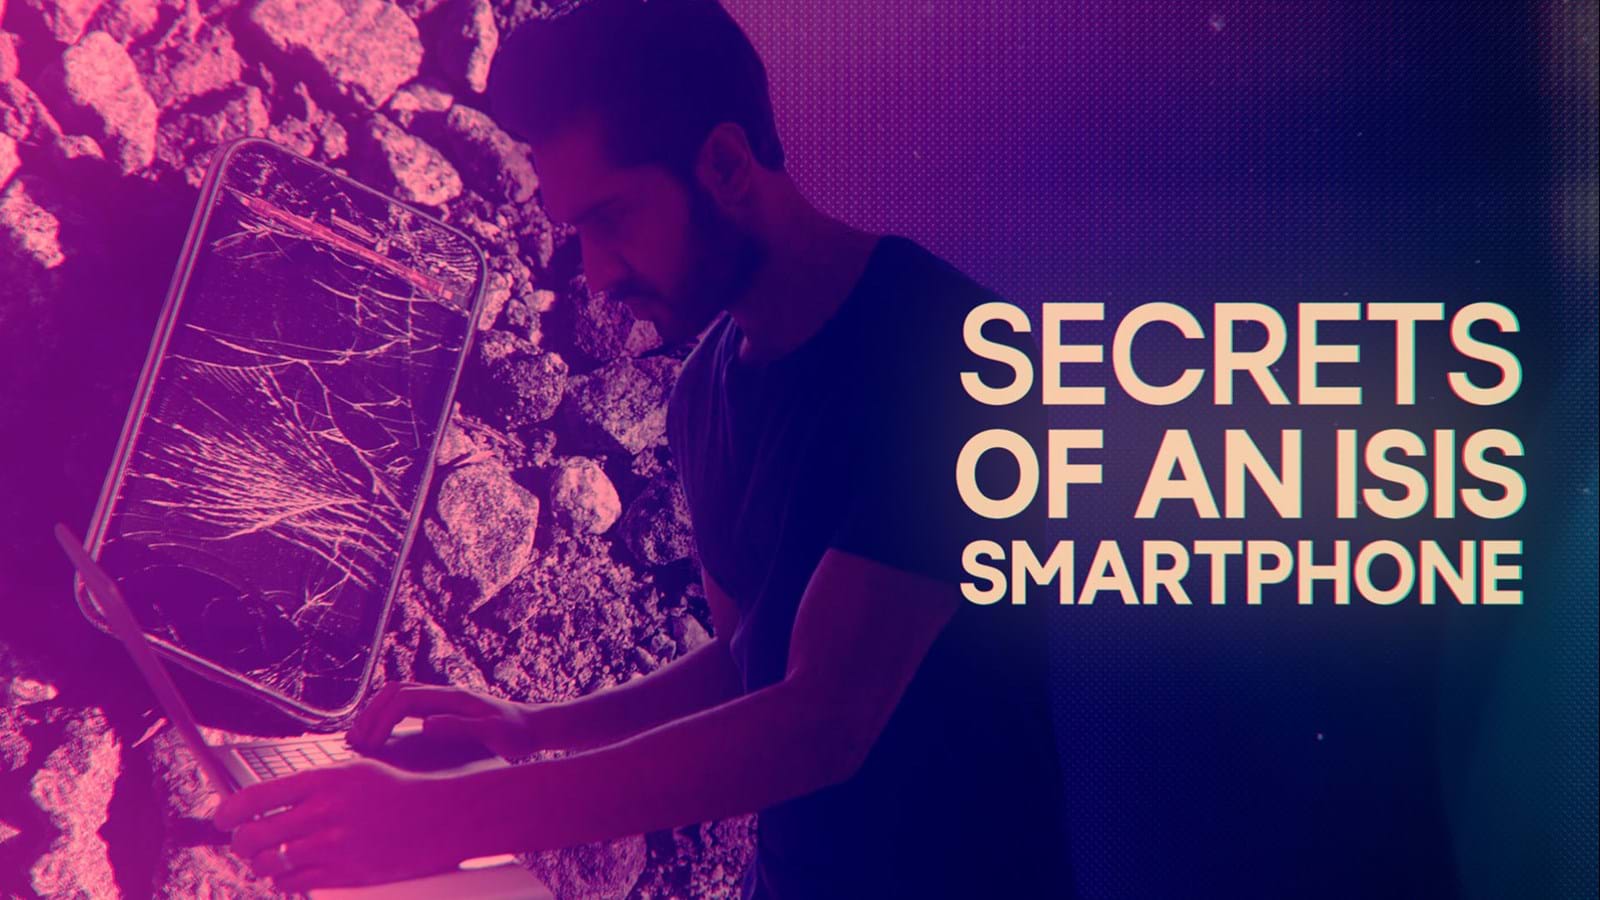 Secrets of an ISIS Smartphone comes to BBC Three on 14th July